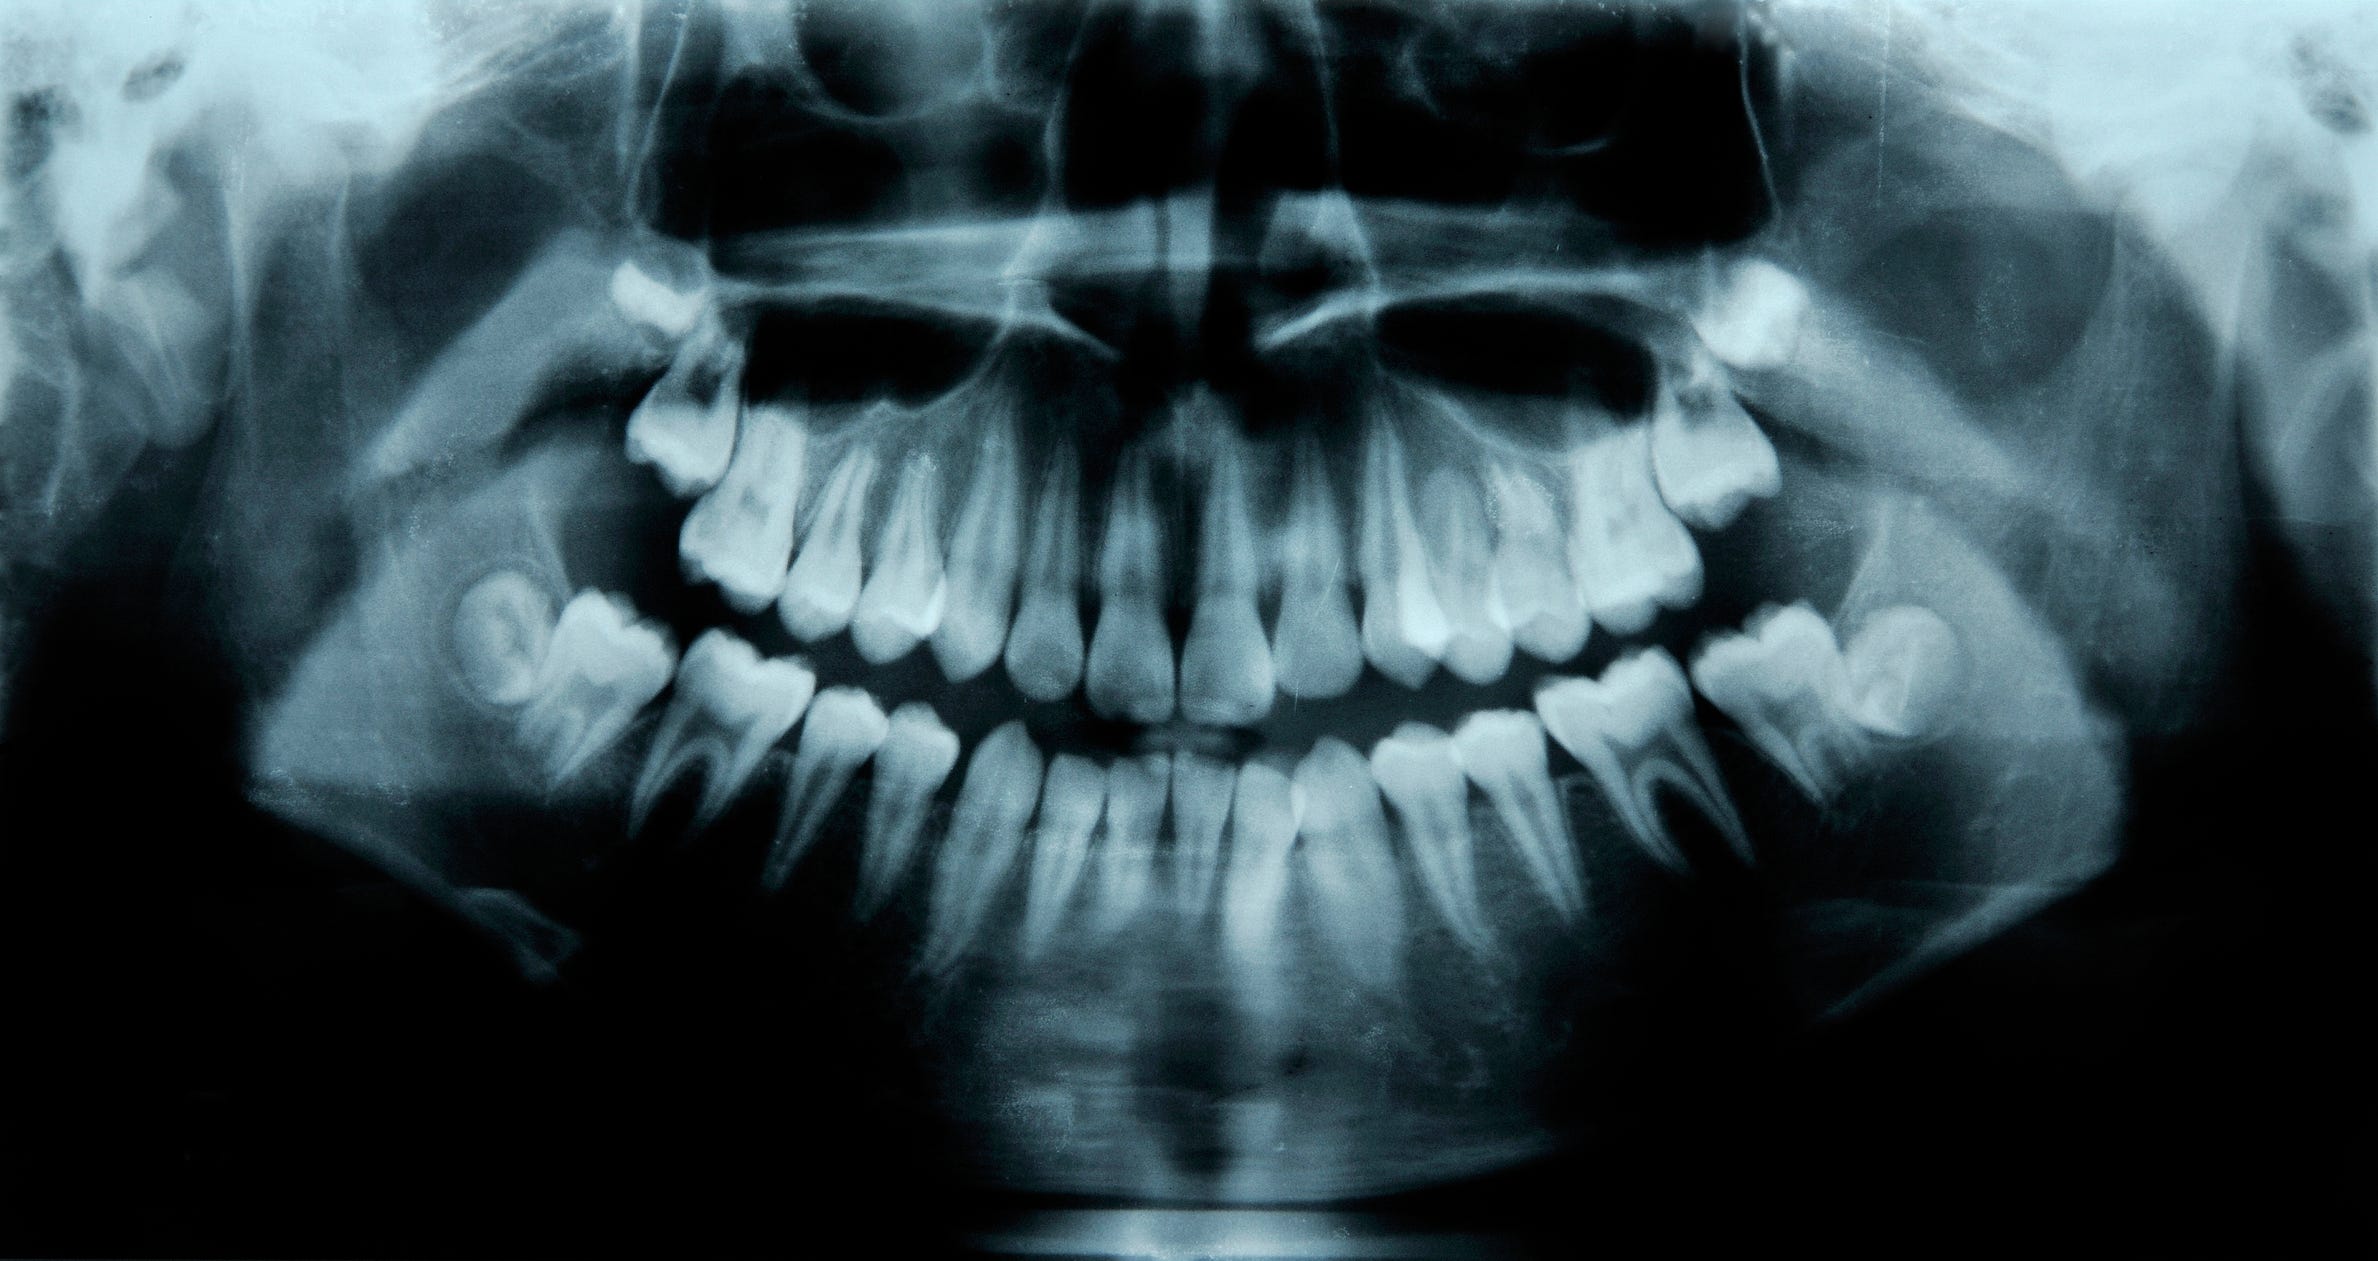 Humans Have a Third Set of Teeth. New Medicine May Help Them Grow.